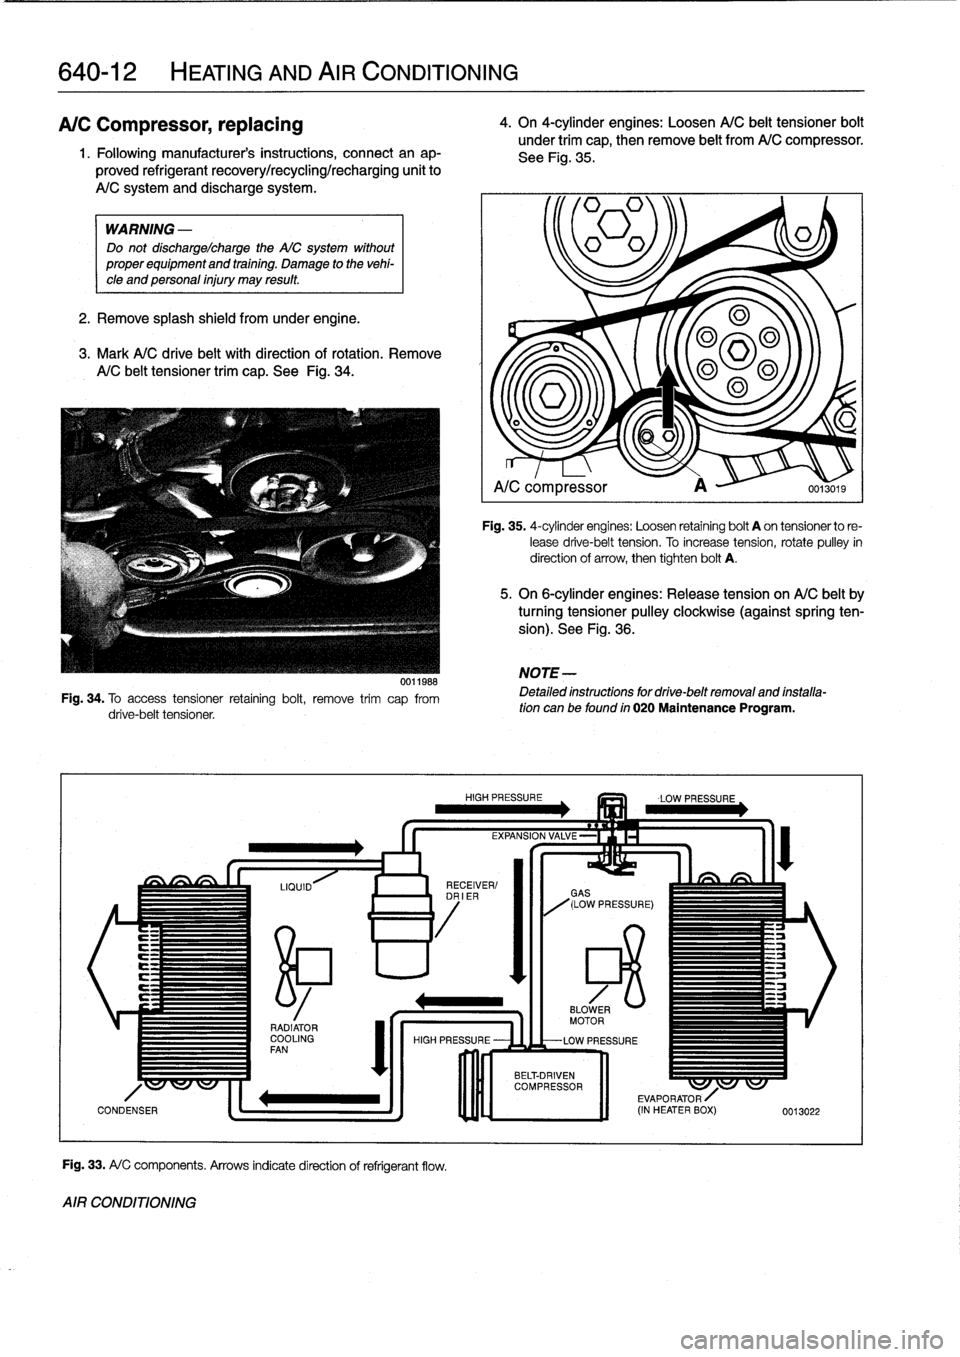 BMW M3 1994 E36 Owners Manual 
640-12

	

HEATING
AND
AIR
CONDITIONING

A/C
Compressor,
replacing

1
.
Followingmanufacturers
instructions,
connectanap-

proved
refrigerant
recovery/recycling/recharging
unit
to

A/C
system
and
di